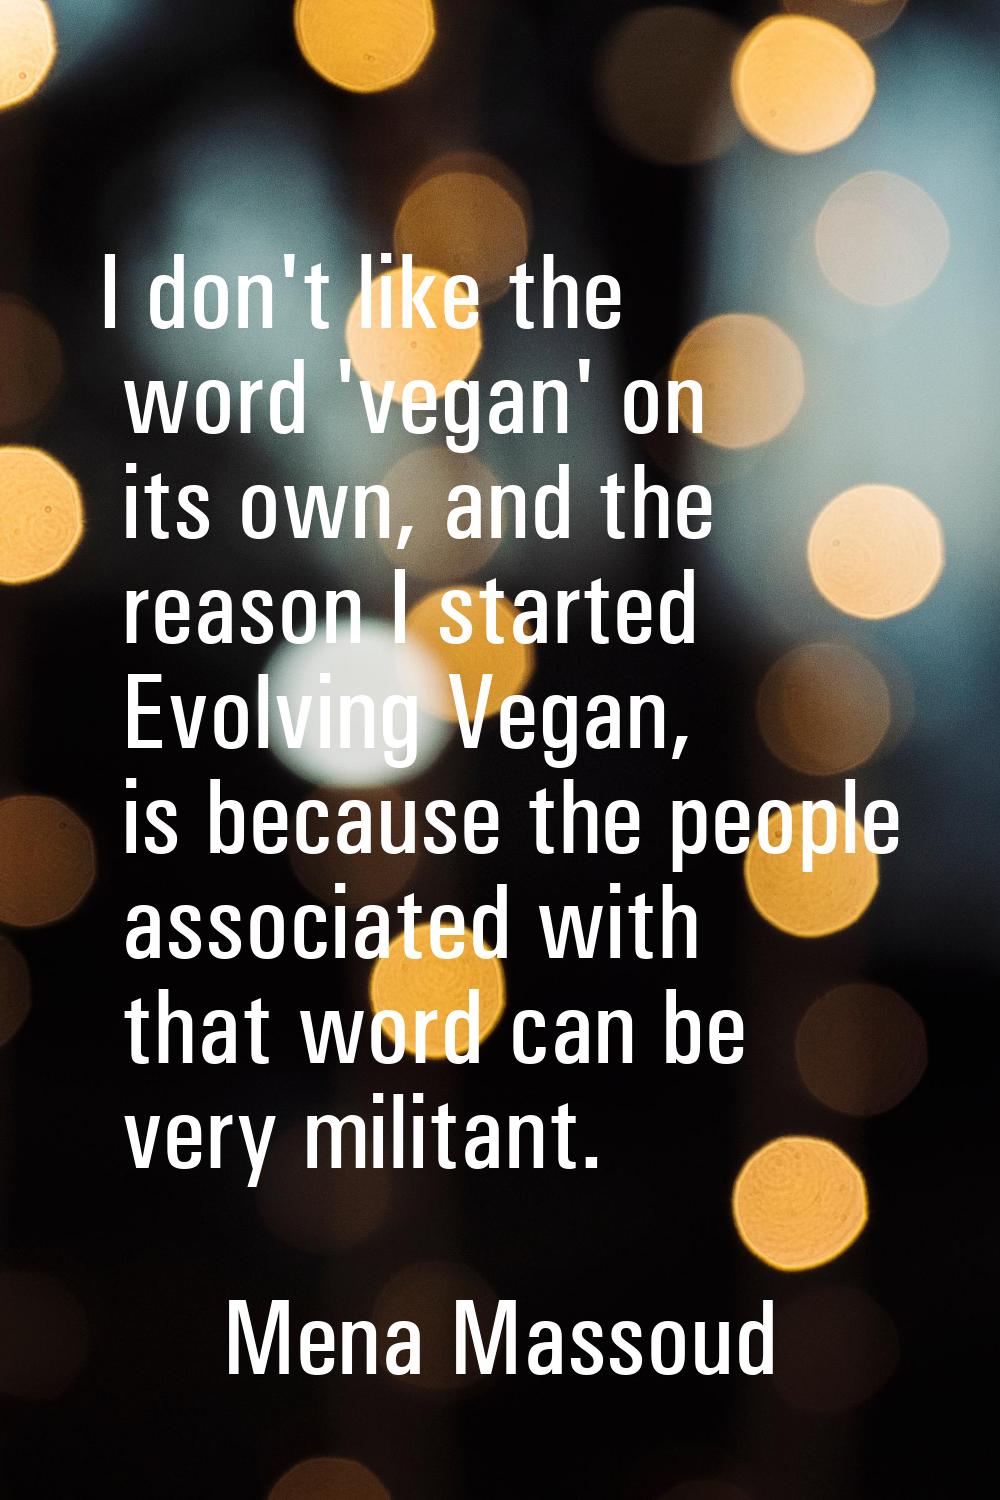 I don't like the word 'vegan' on its own, and the reason I started Evolving Vegan, is because the p